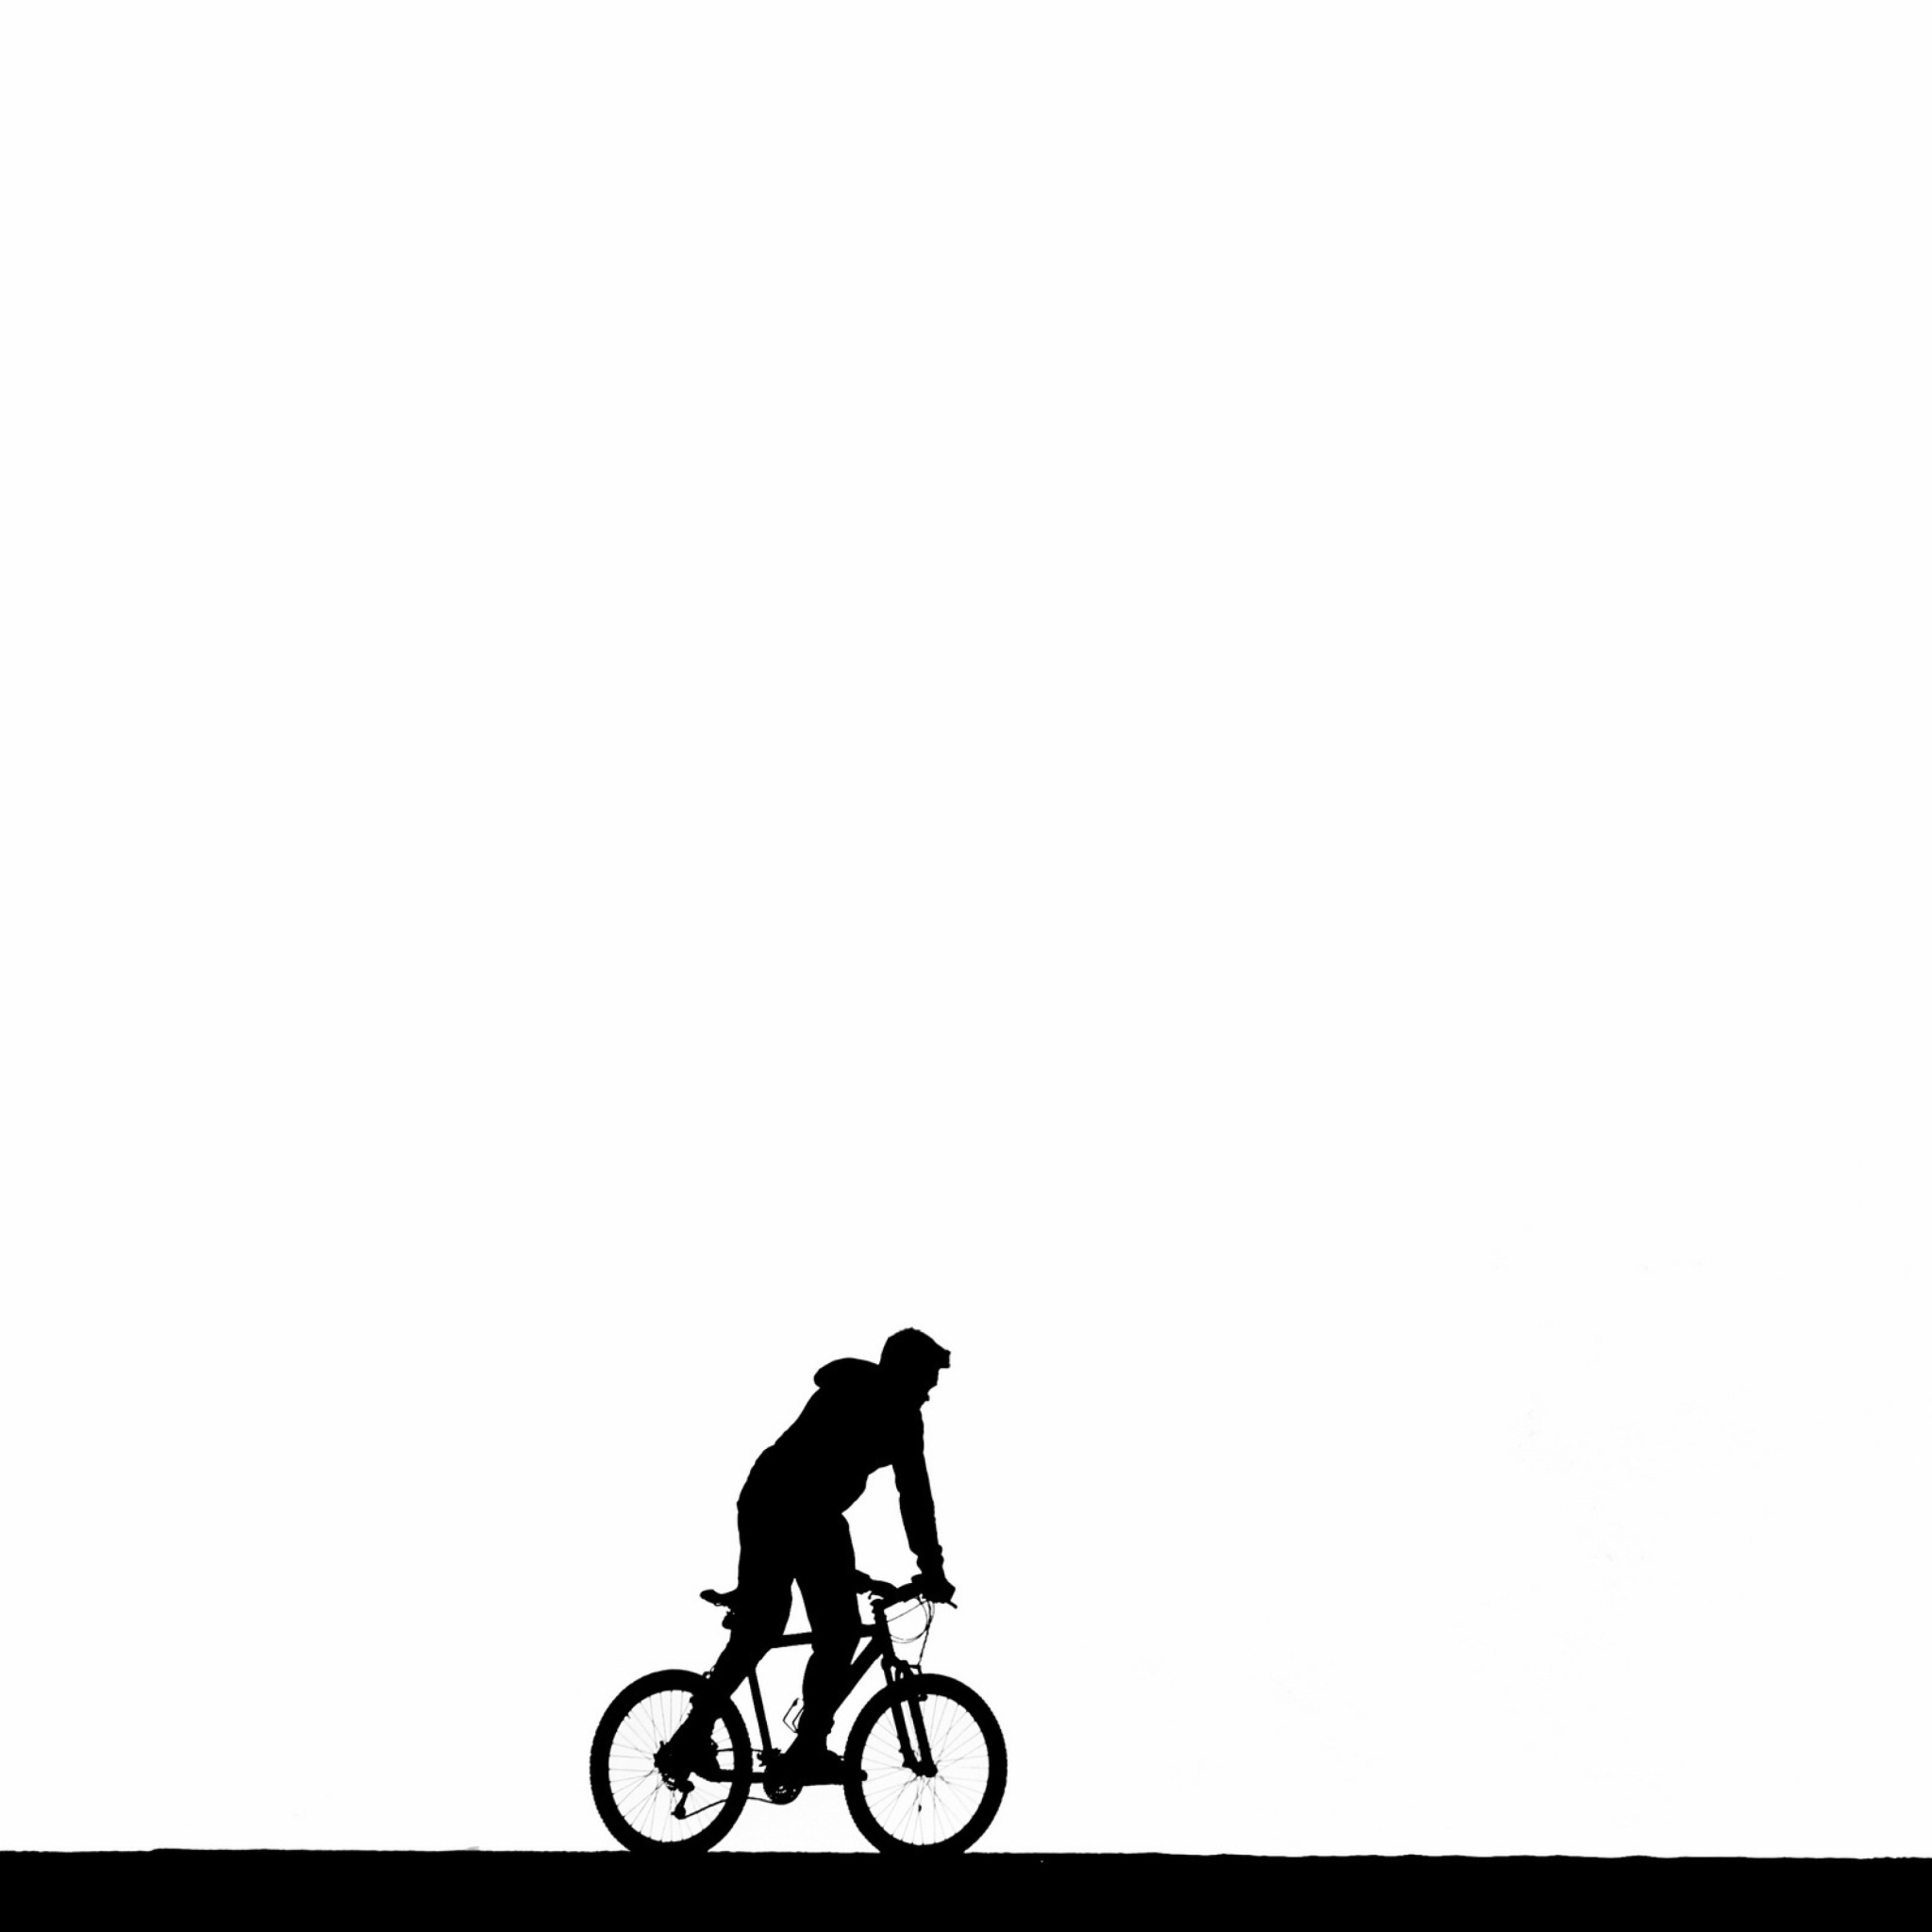 Bicycle Silhouette wallpaper 2048x2048